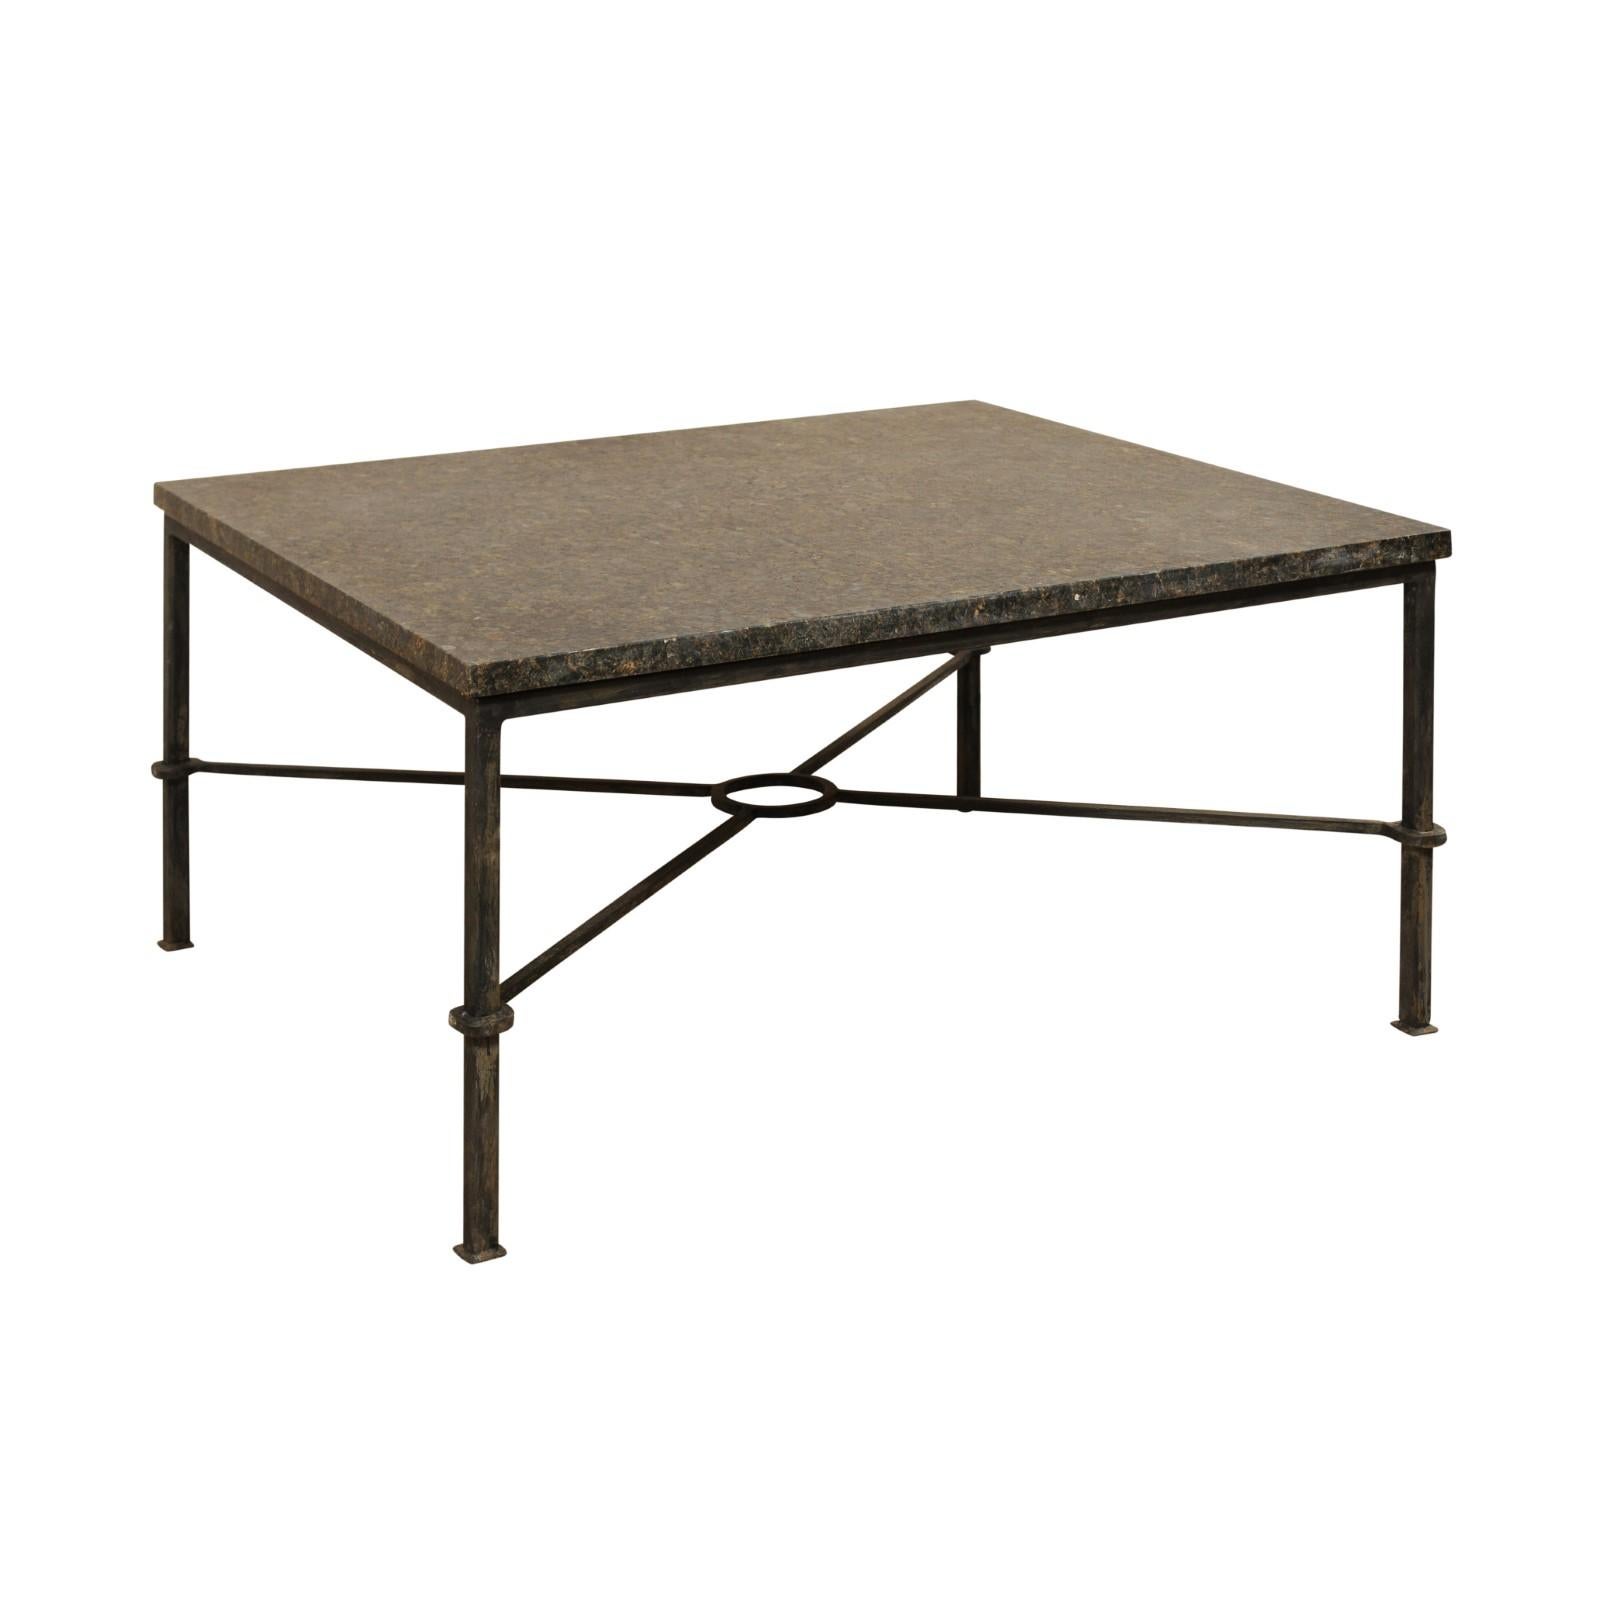 Custom Coffee Table with Honed Granite Top and Black Iron Base